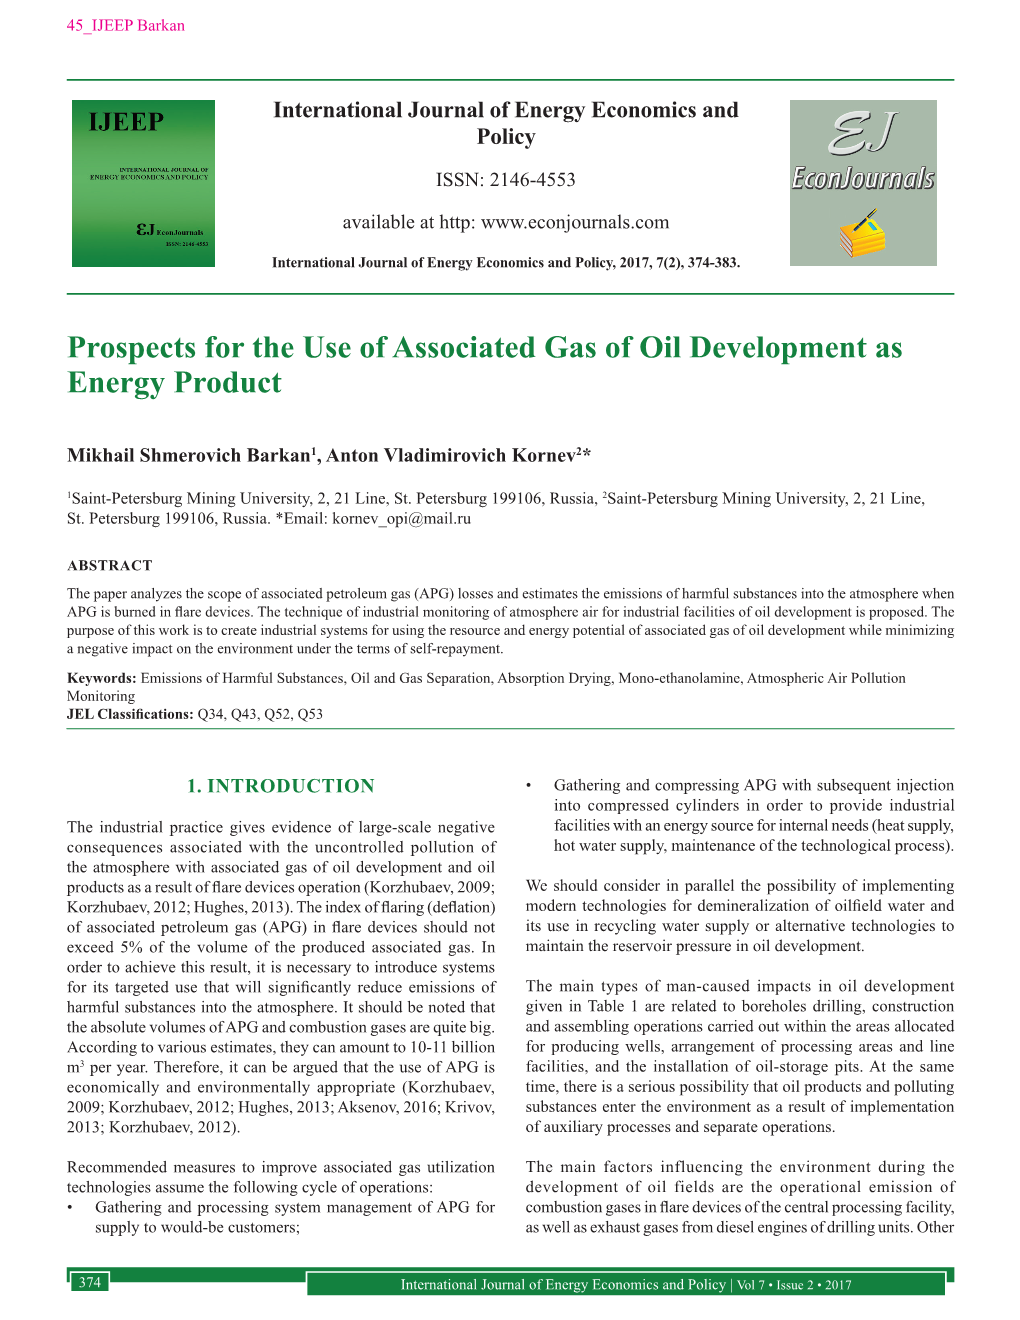 Prospects for the Use of Associated Gas of Oil Development As Energy Product